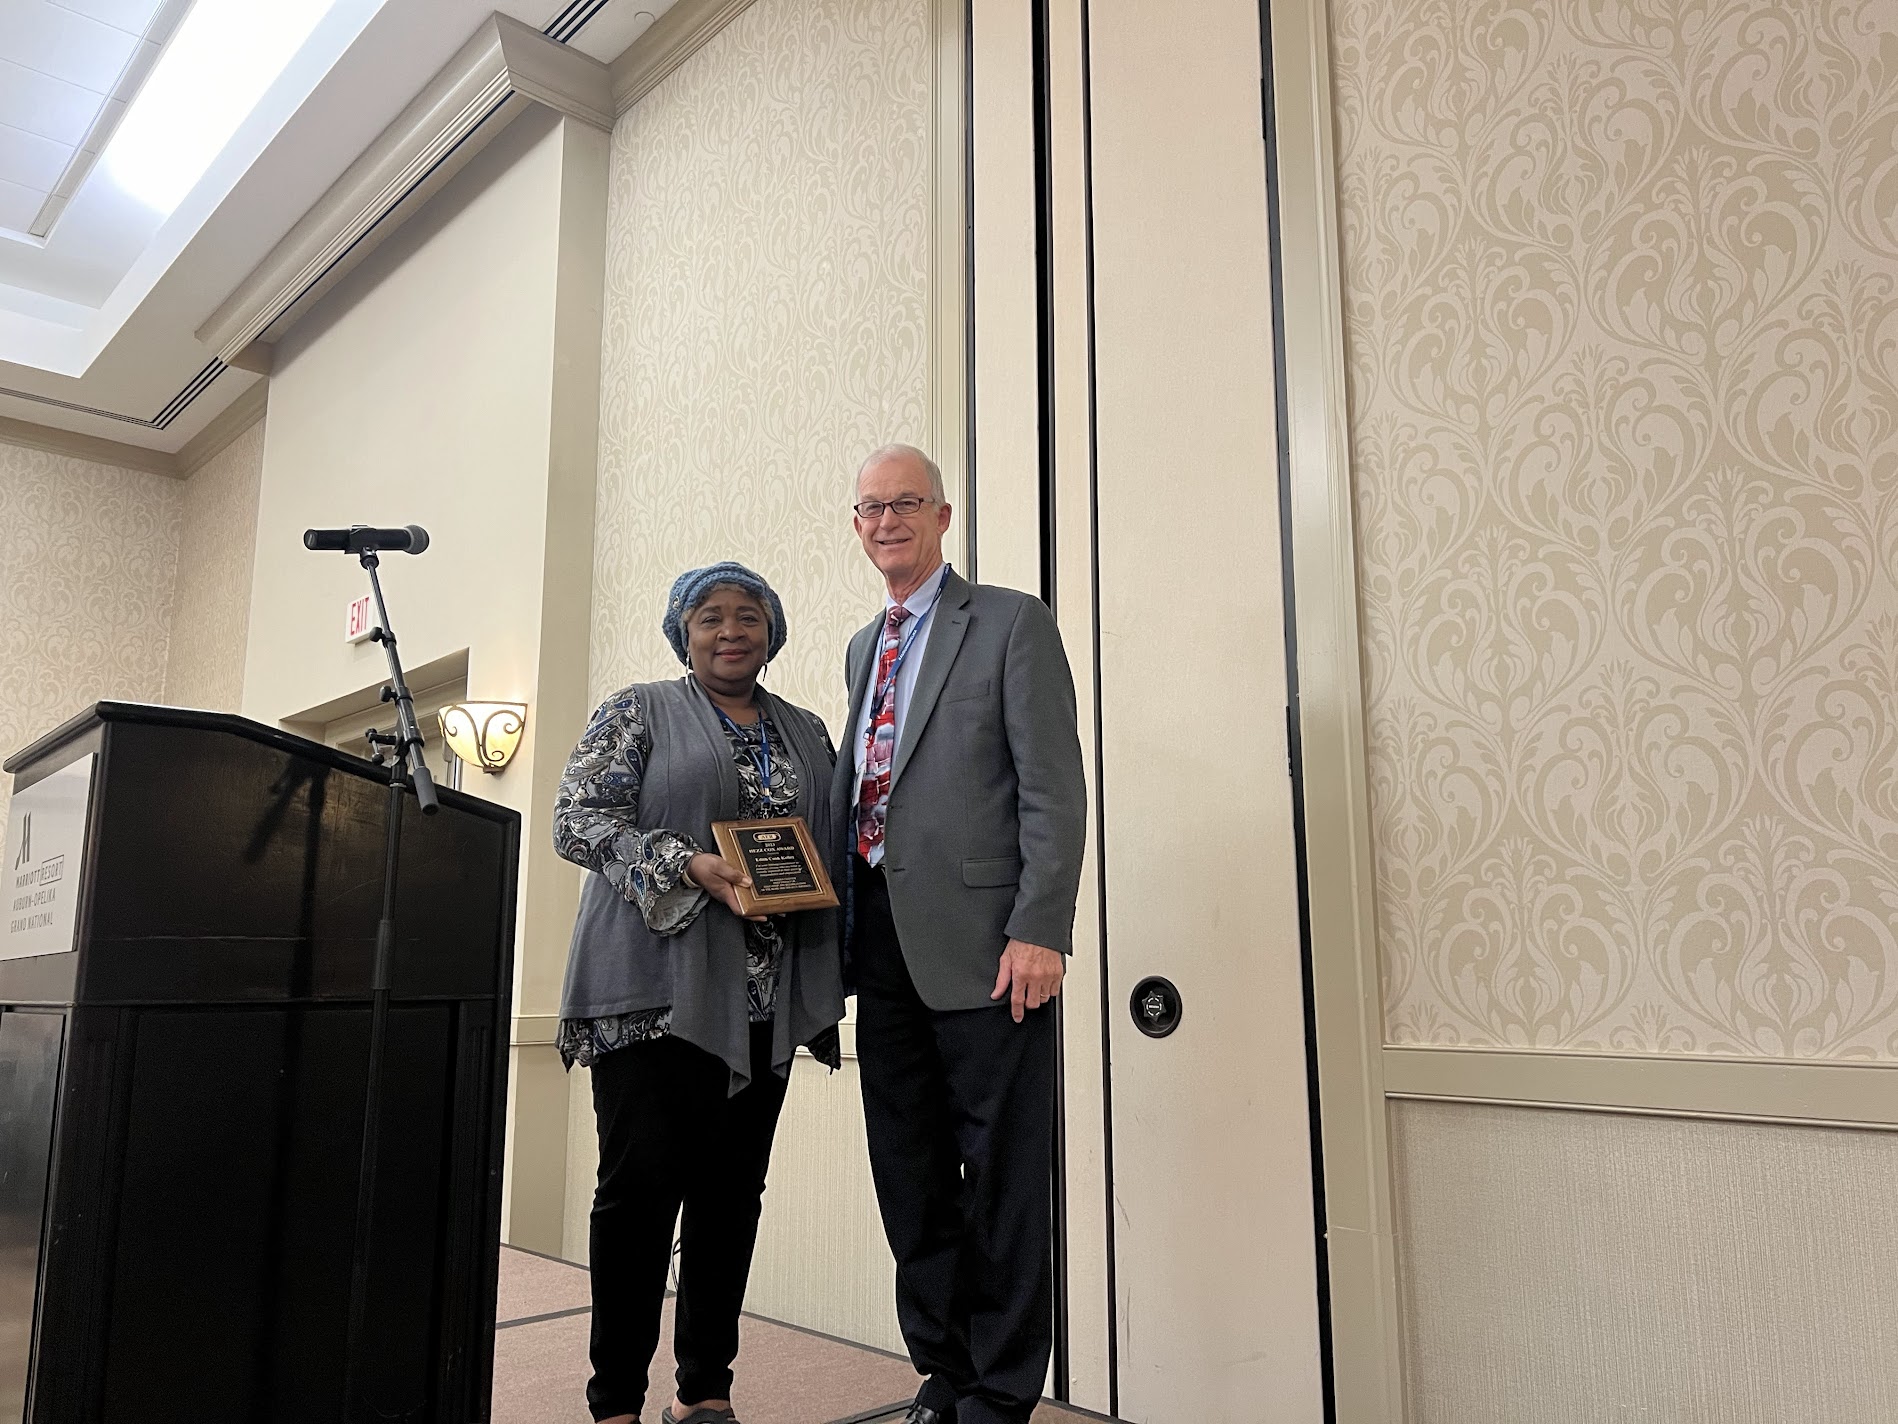 Jack Harrison, AL AER Board Member and Membership Chair presents the 2023 Hezz Cox Award to Edith Cook Kelley.